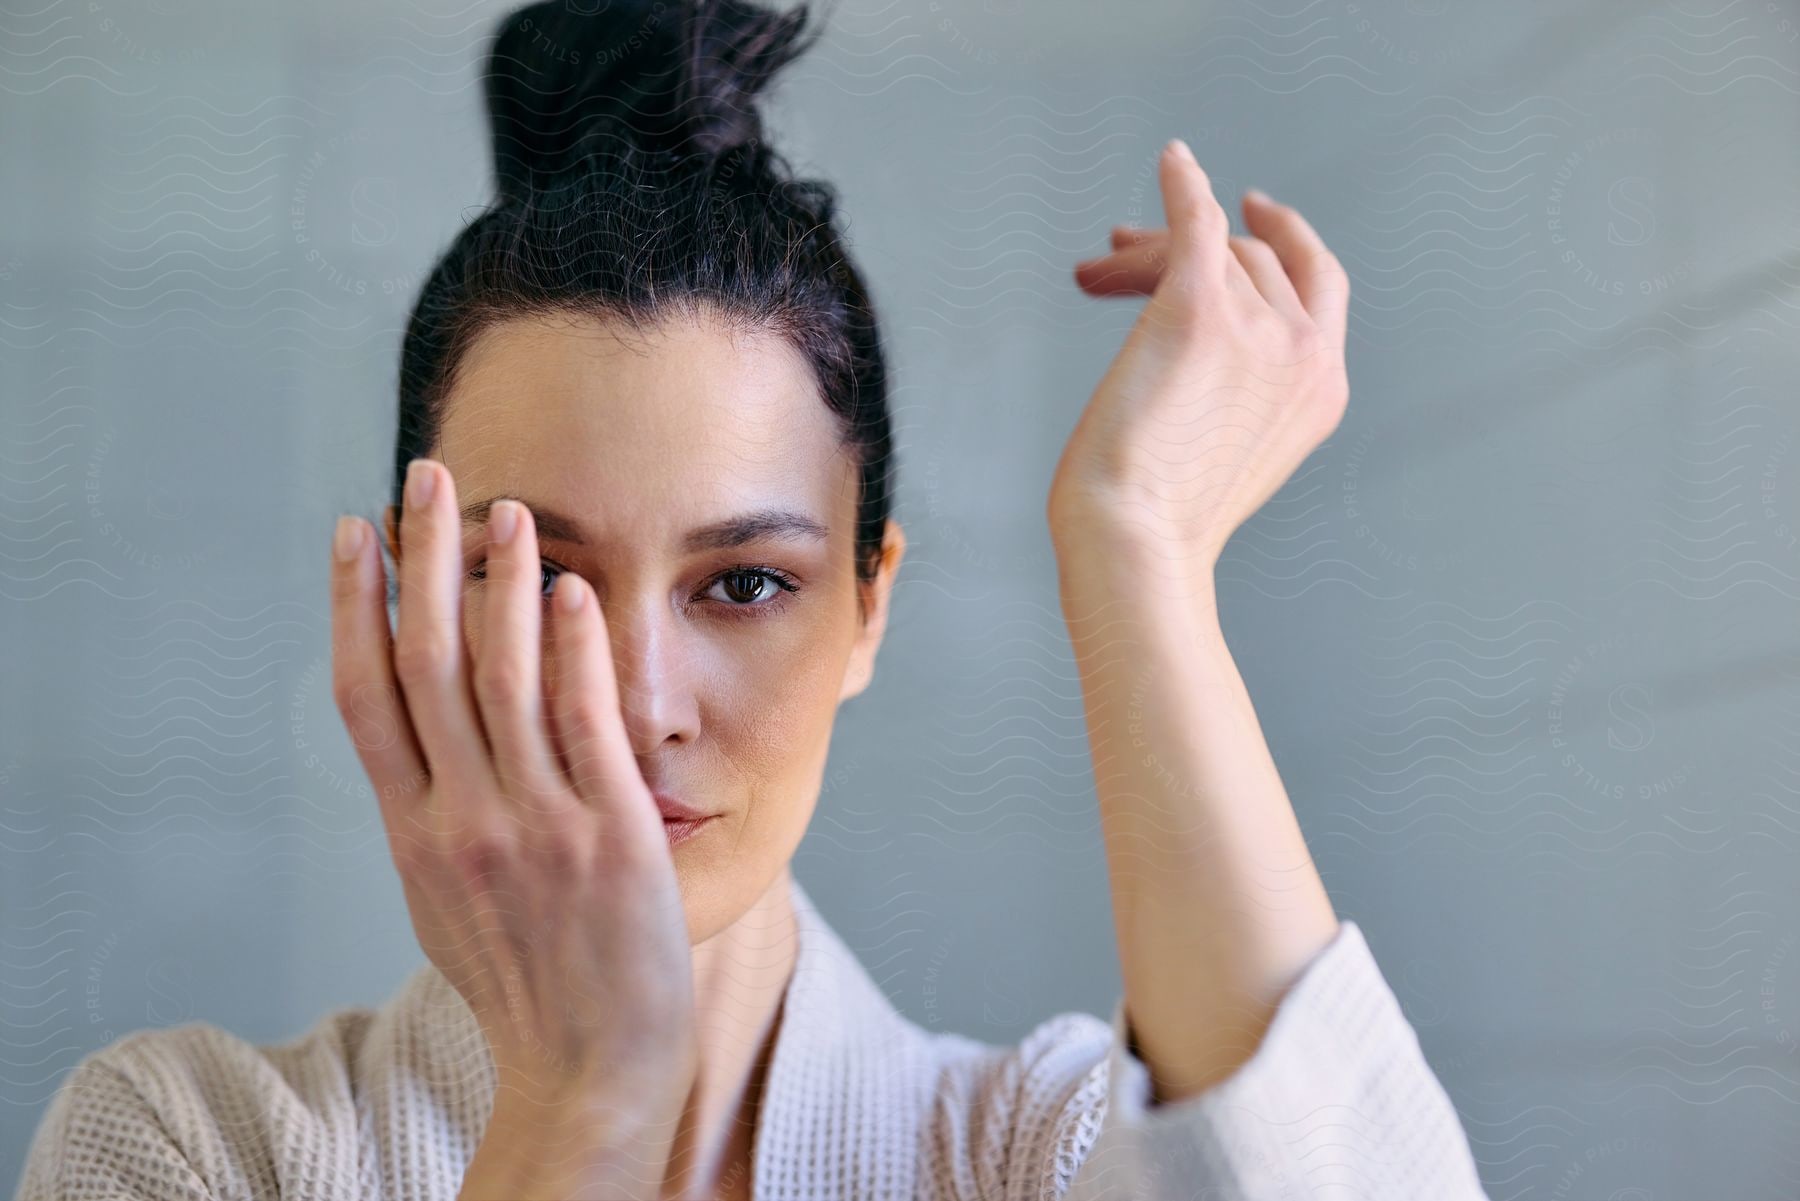 Woman with a bun hairstyle, her face partially obscured by her hand